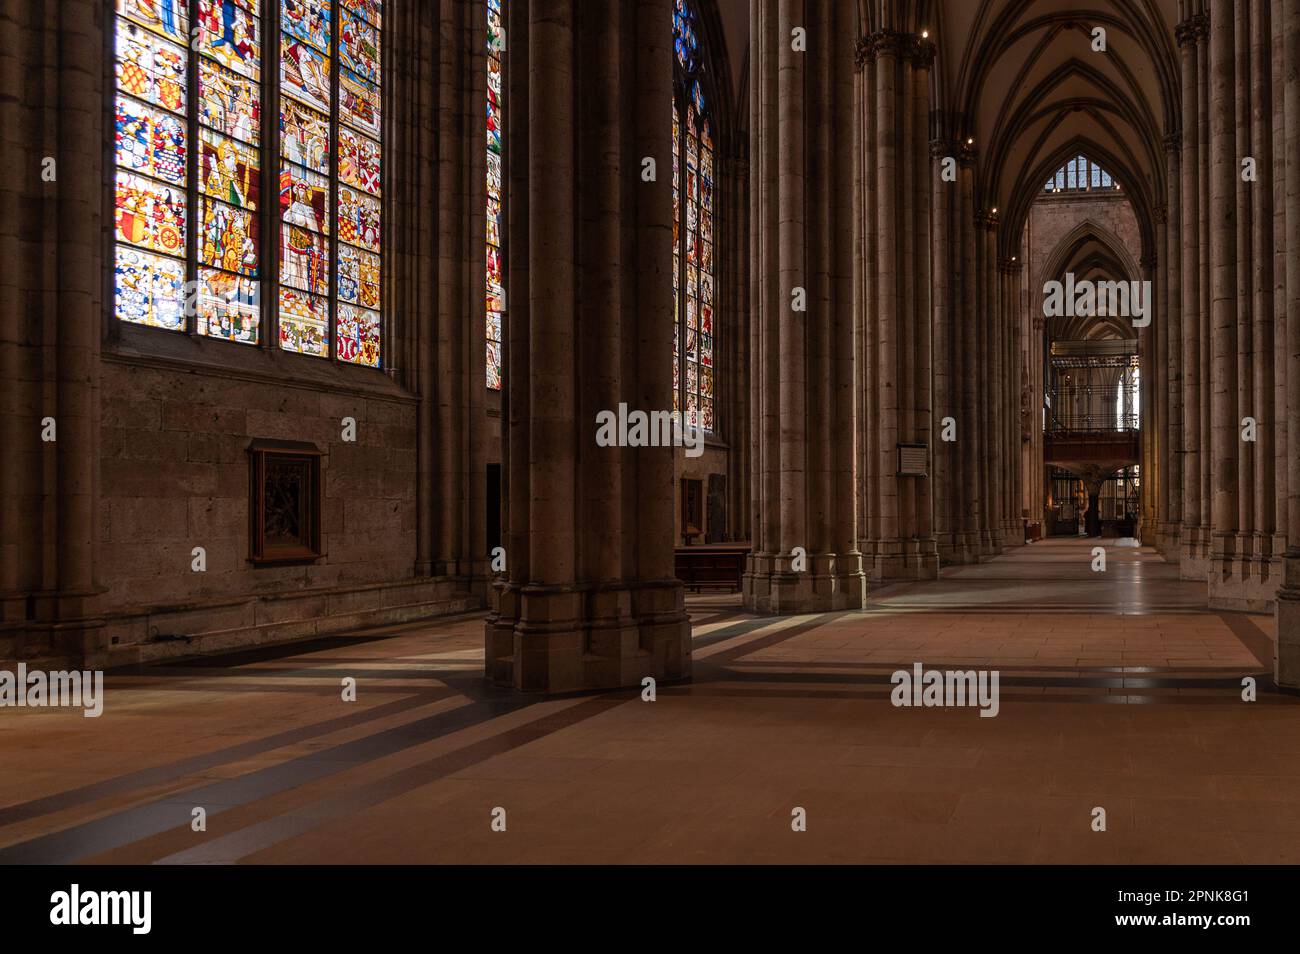 Colonnade and stained glass of the Cologne cathedral, Germany Stock Photo